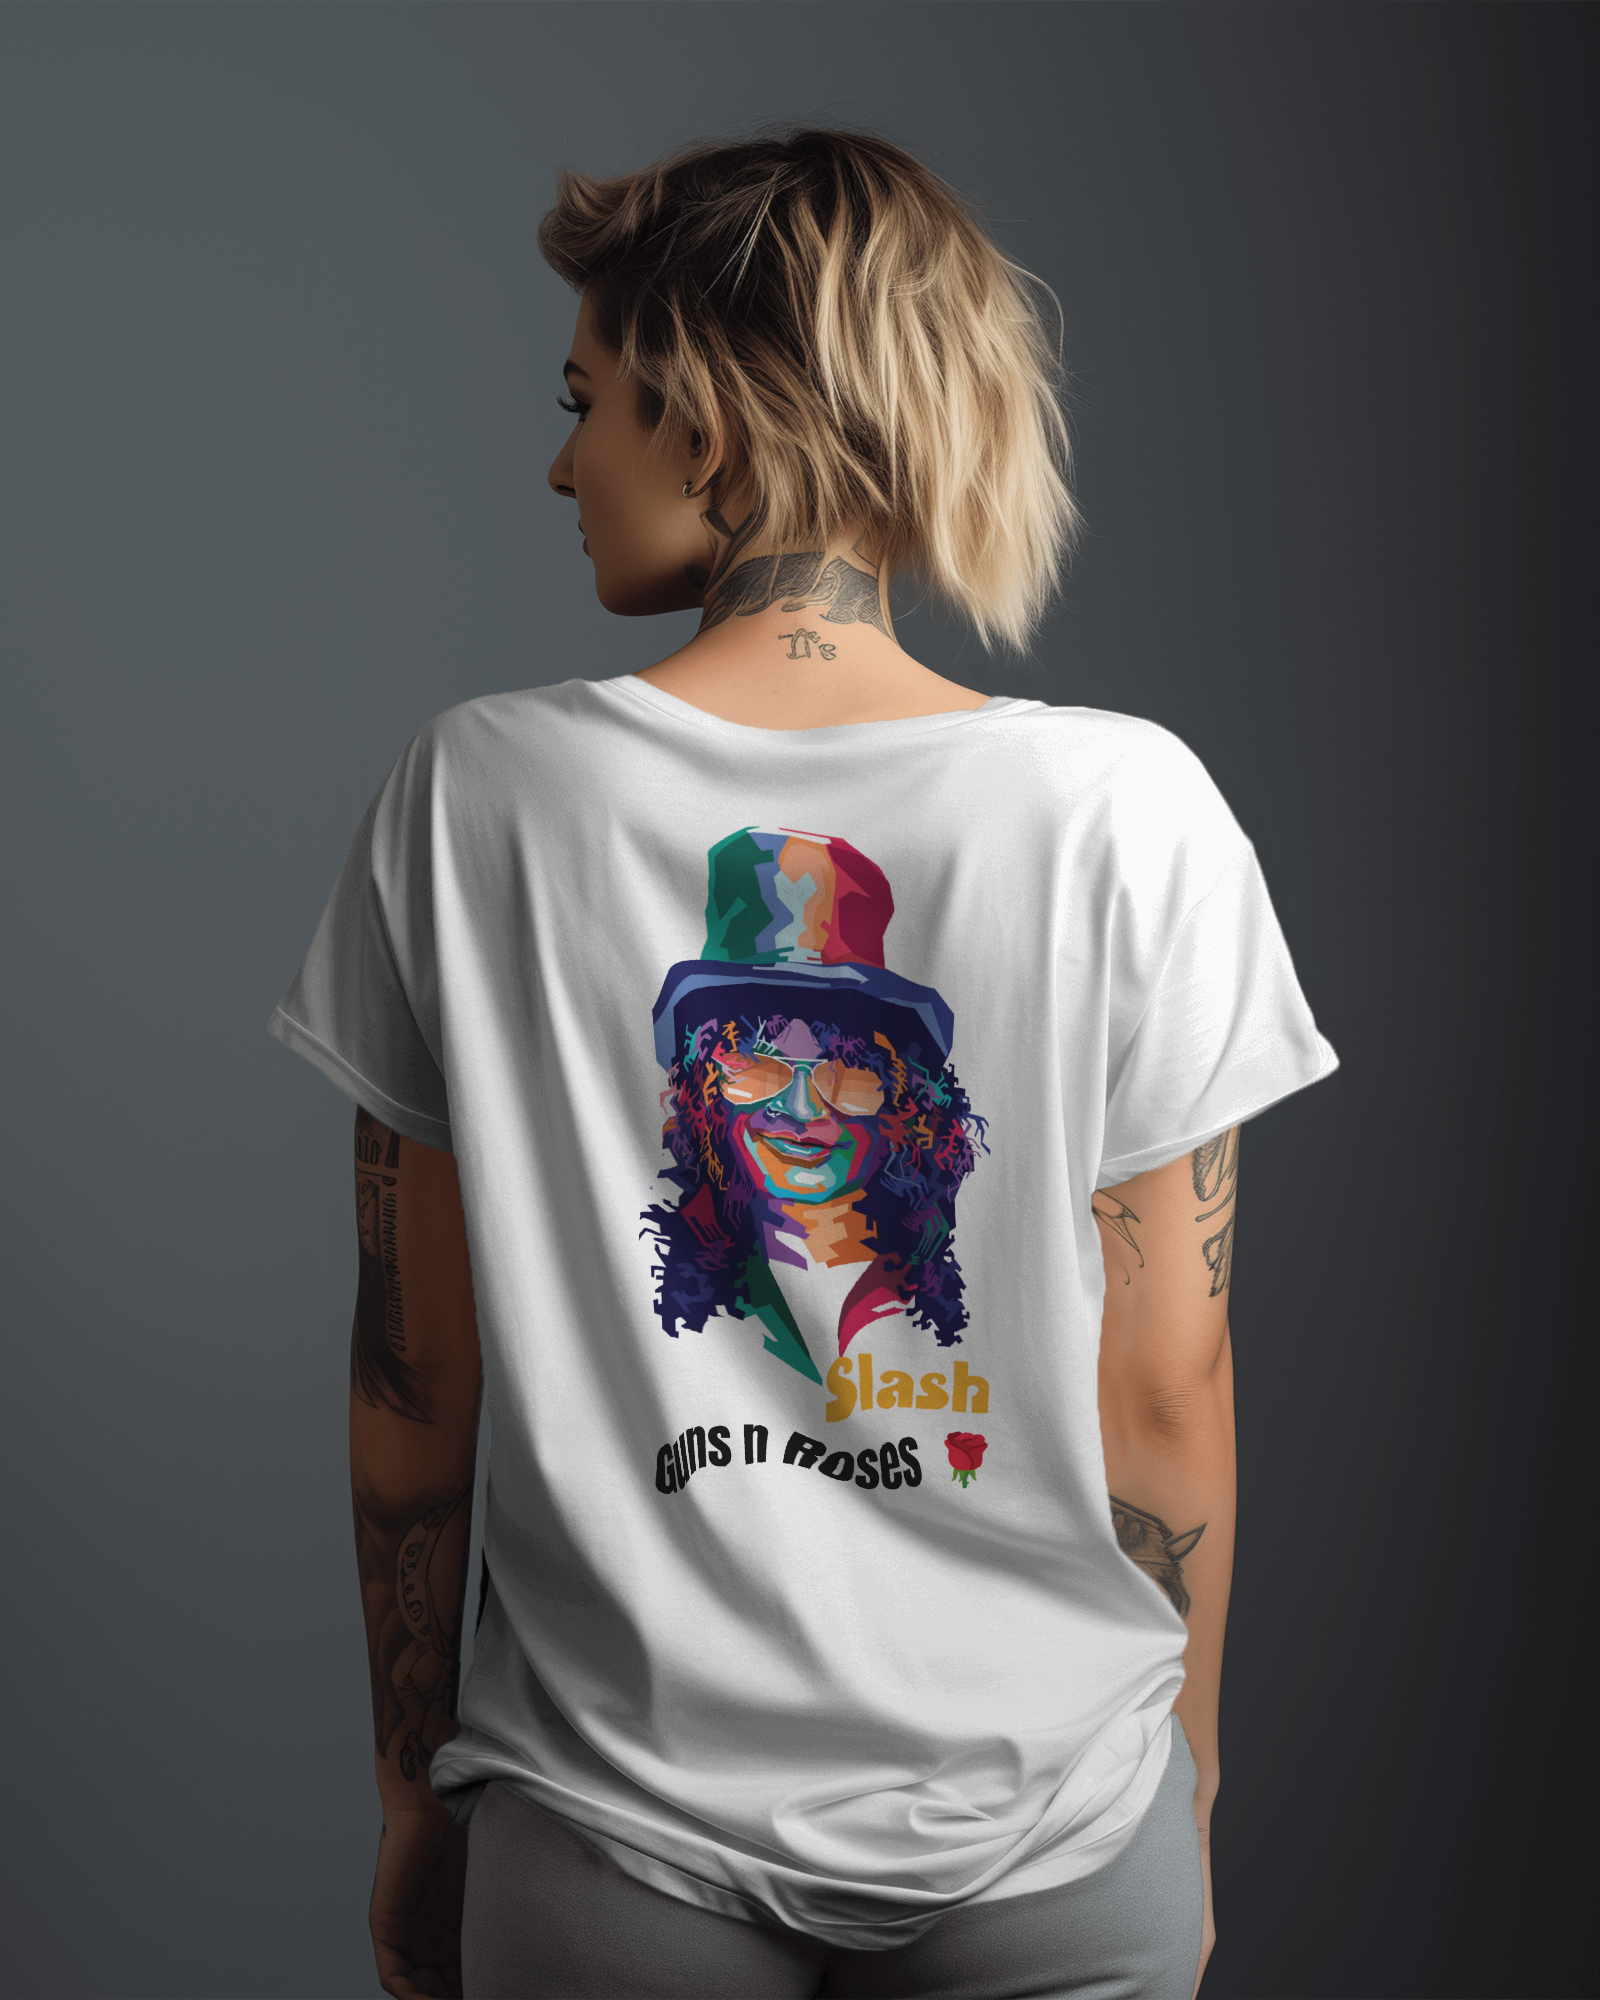 Guns And Roses Slash Printed on T-Shirt Back and Front Side